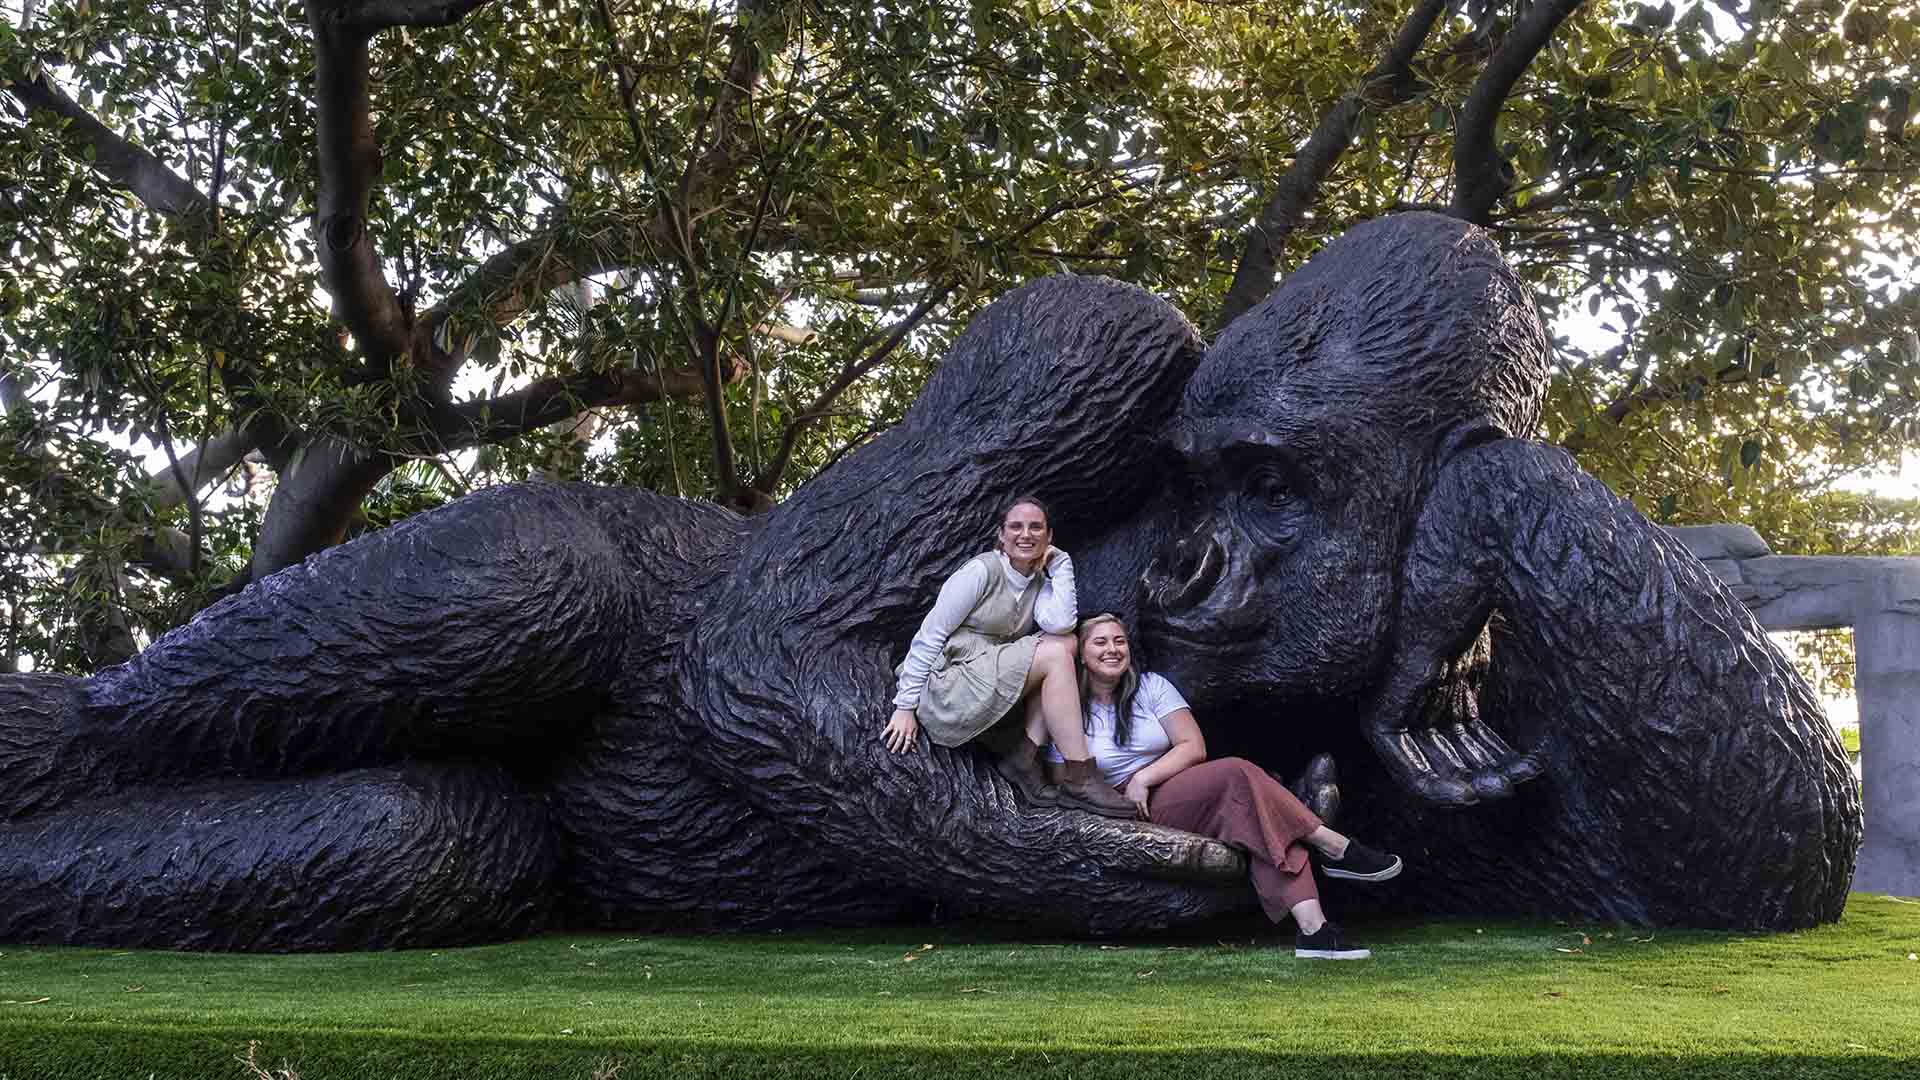 Taronga Zoo Is Now Home to the World's Largest Bronze Gorilla Statue